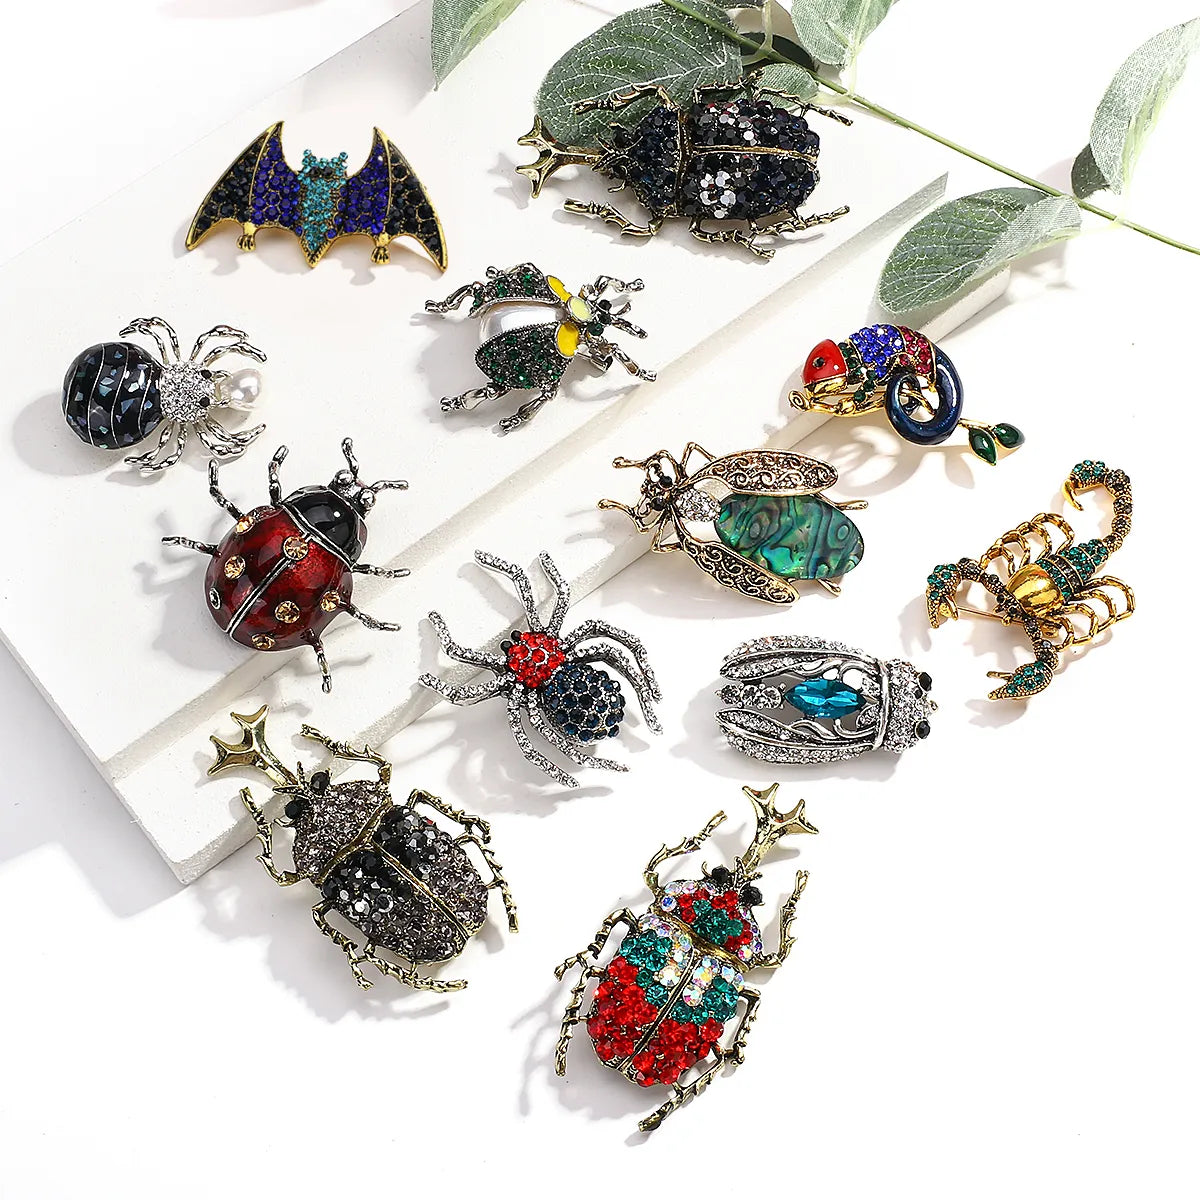 Allyes Delicate Beetles Brooch For Women Rhinestone Enamel Bee Insect Brooches Pins Scarf Bag Clip Crystal Jewelry Accessories